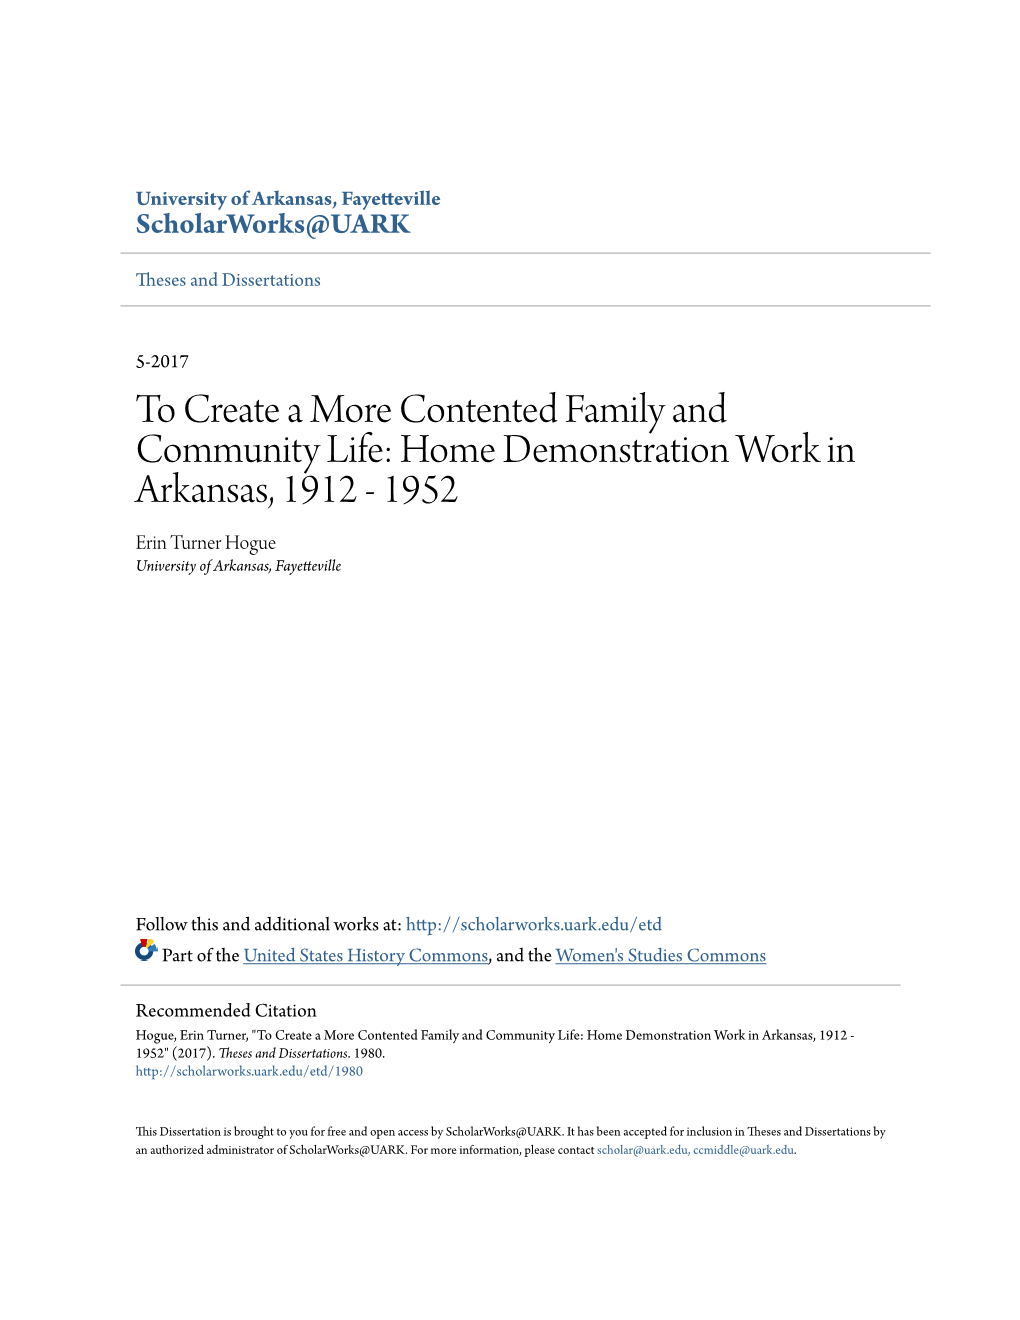 To Create a More Contented Family and Community Life: Home Demonstration Work in Arkansas, 1912 - 1952 Erin Turner Hogue University of Arkansas, Fayetteville